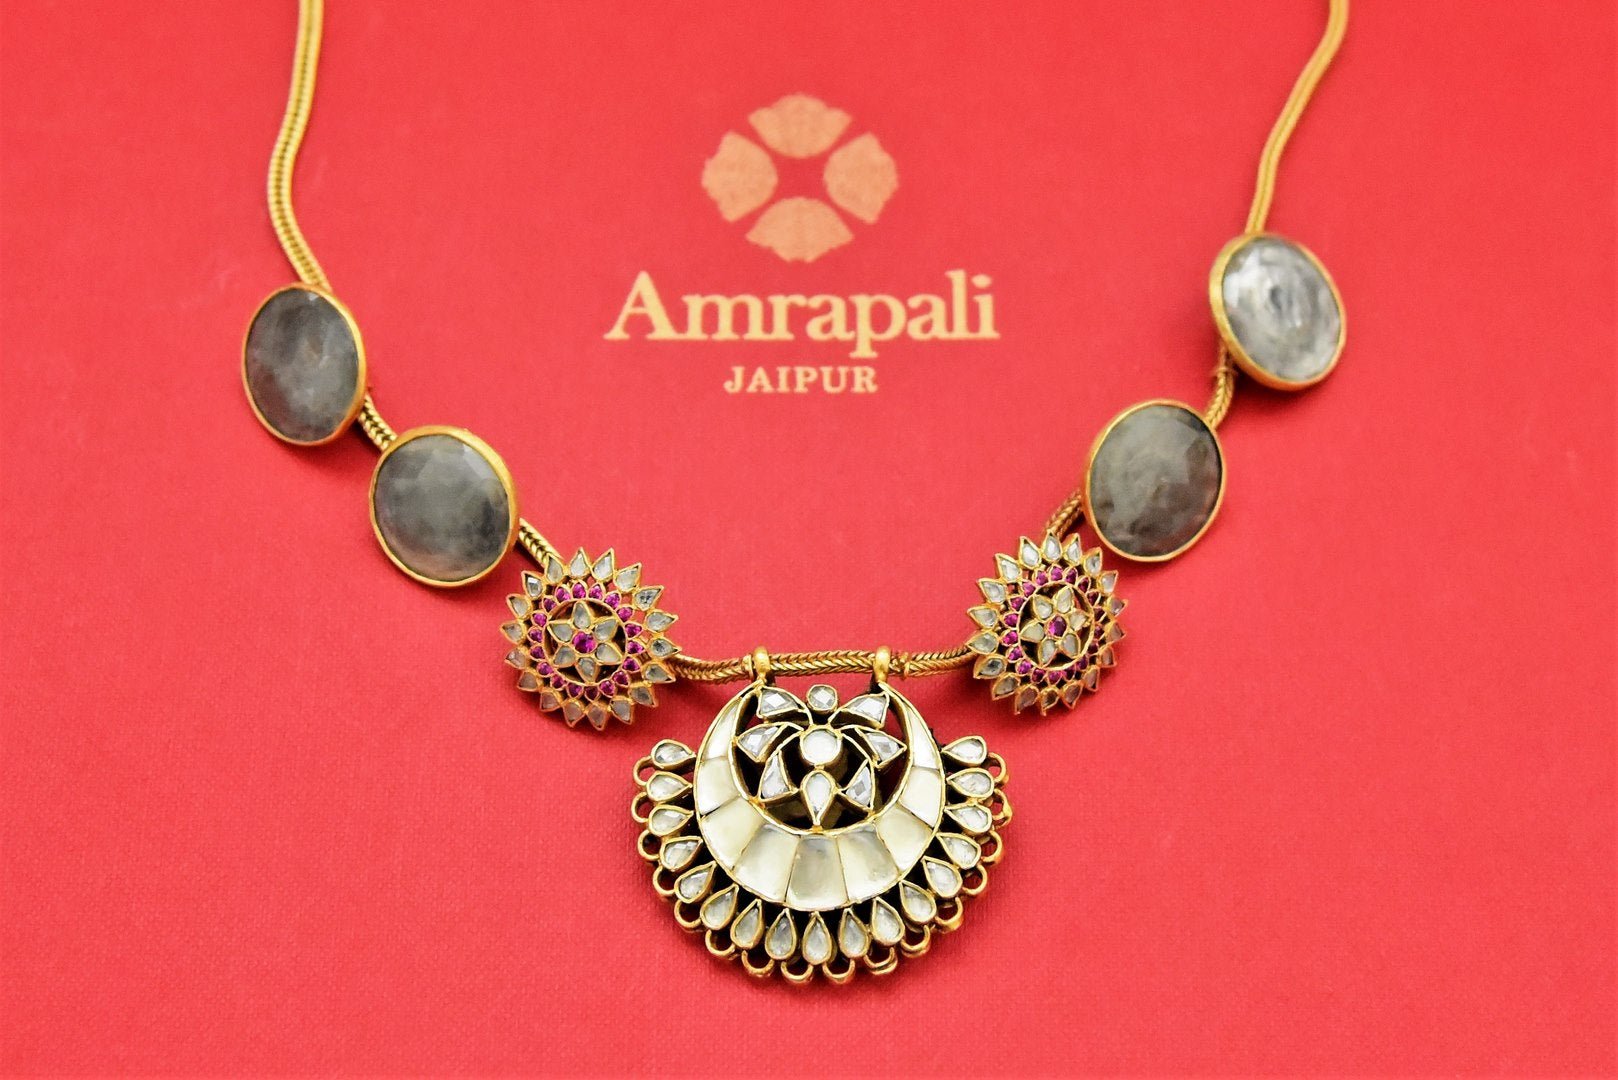 Buy beautiful gold plated necklace in USA with glass flower pendant. Shop beautiful Amrapali jewelry, gold plated necklaces, silver jewelry, wedding jewelry, gold plated earrings from Pure Elegance Indian fashion store in USA.-full view